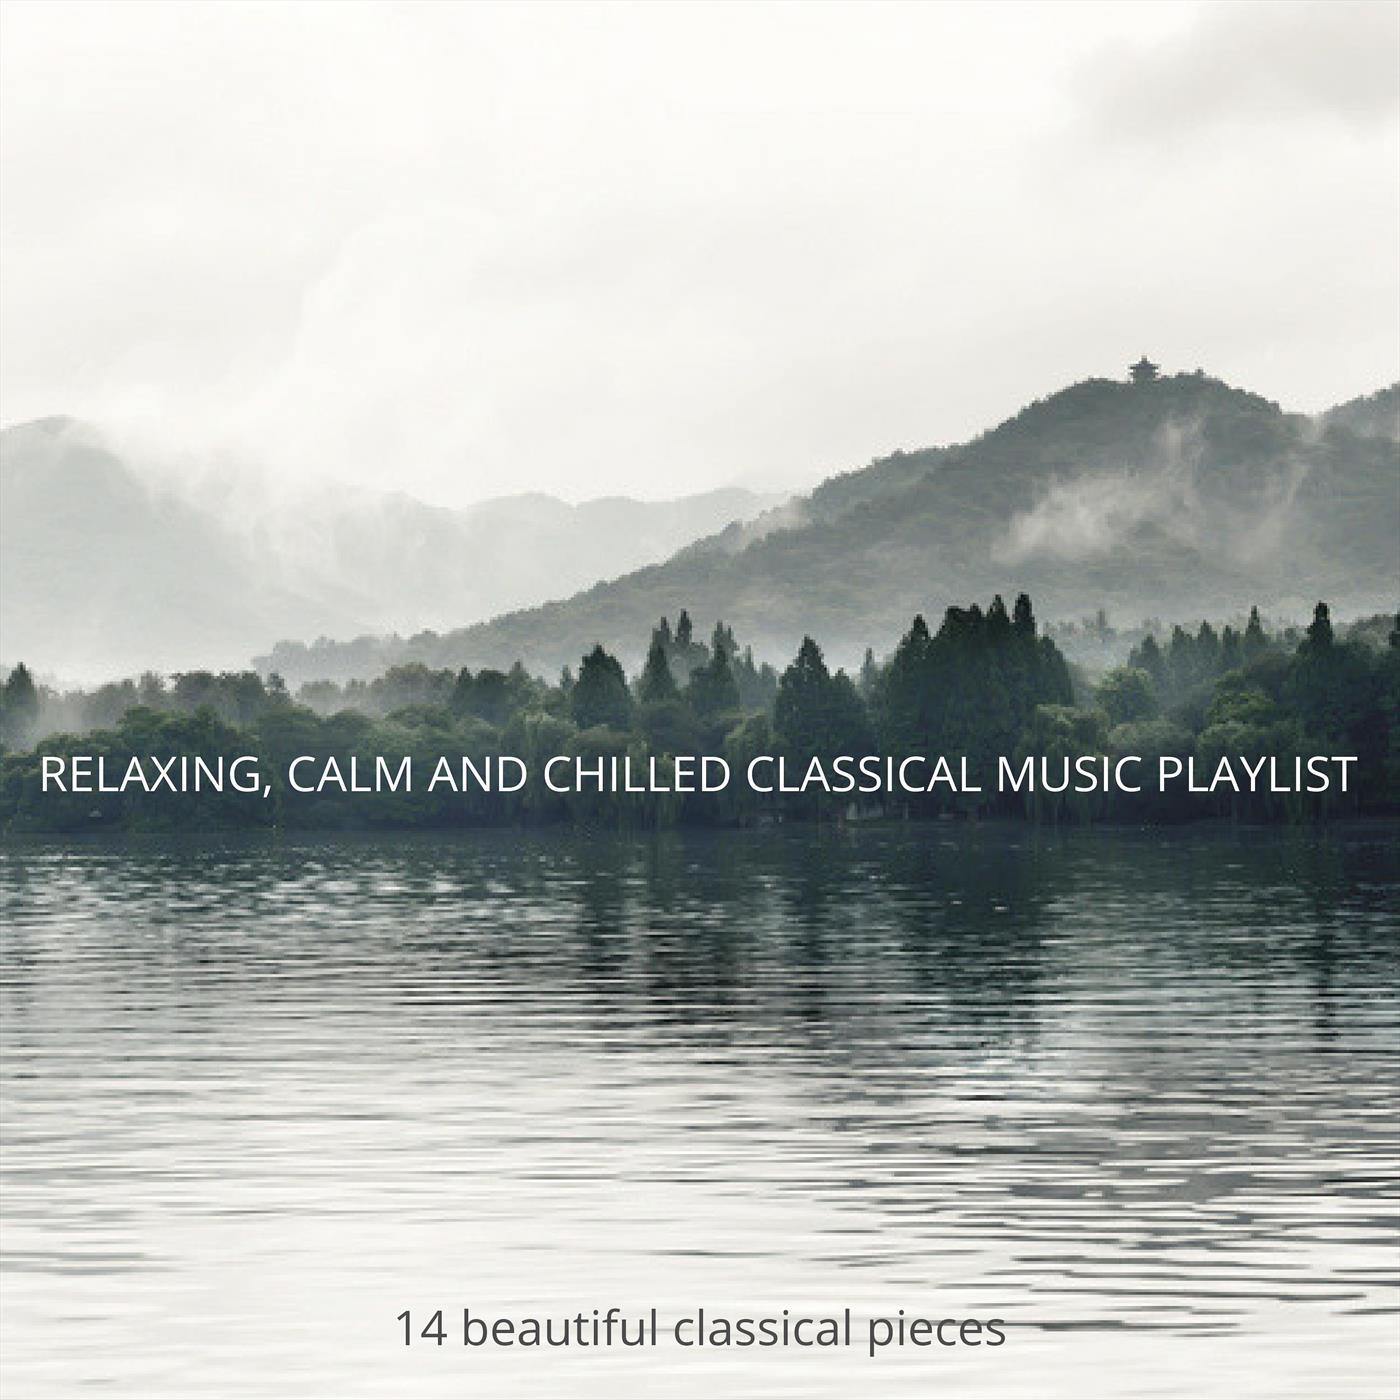 Relaxing, Calm and Chilled Classical Music Playlist: 14 Beautiful Classical Pieces